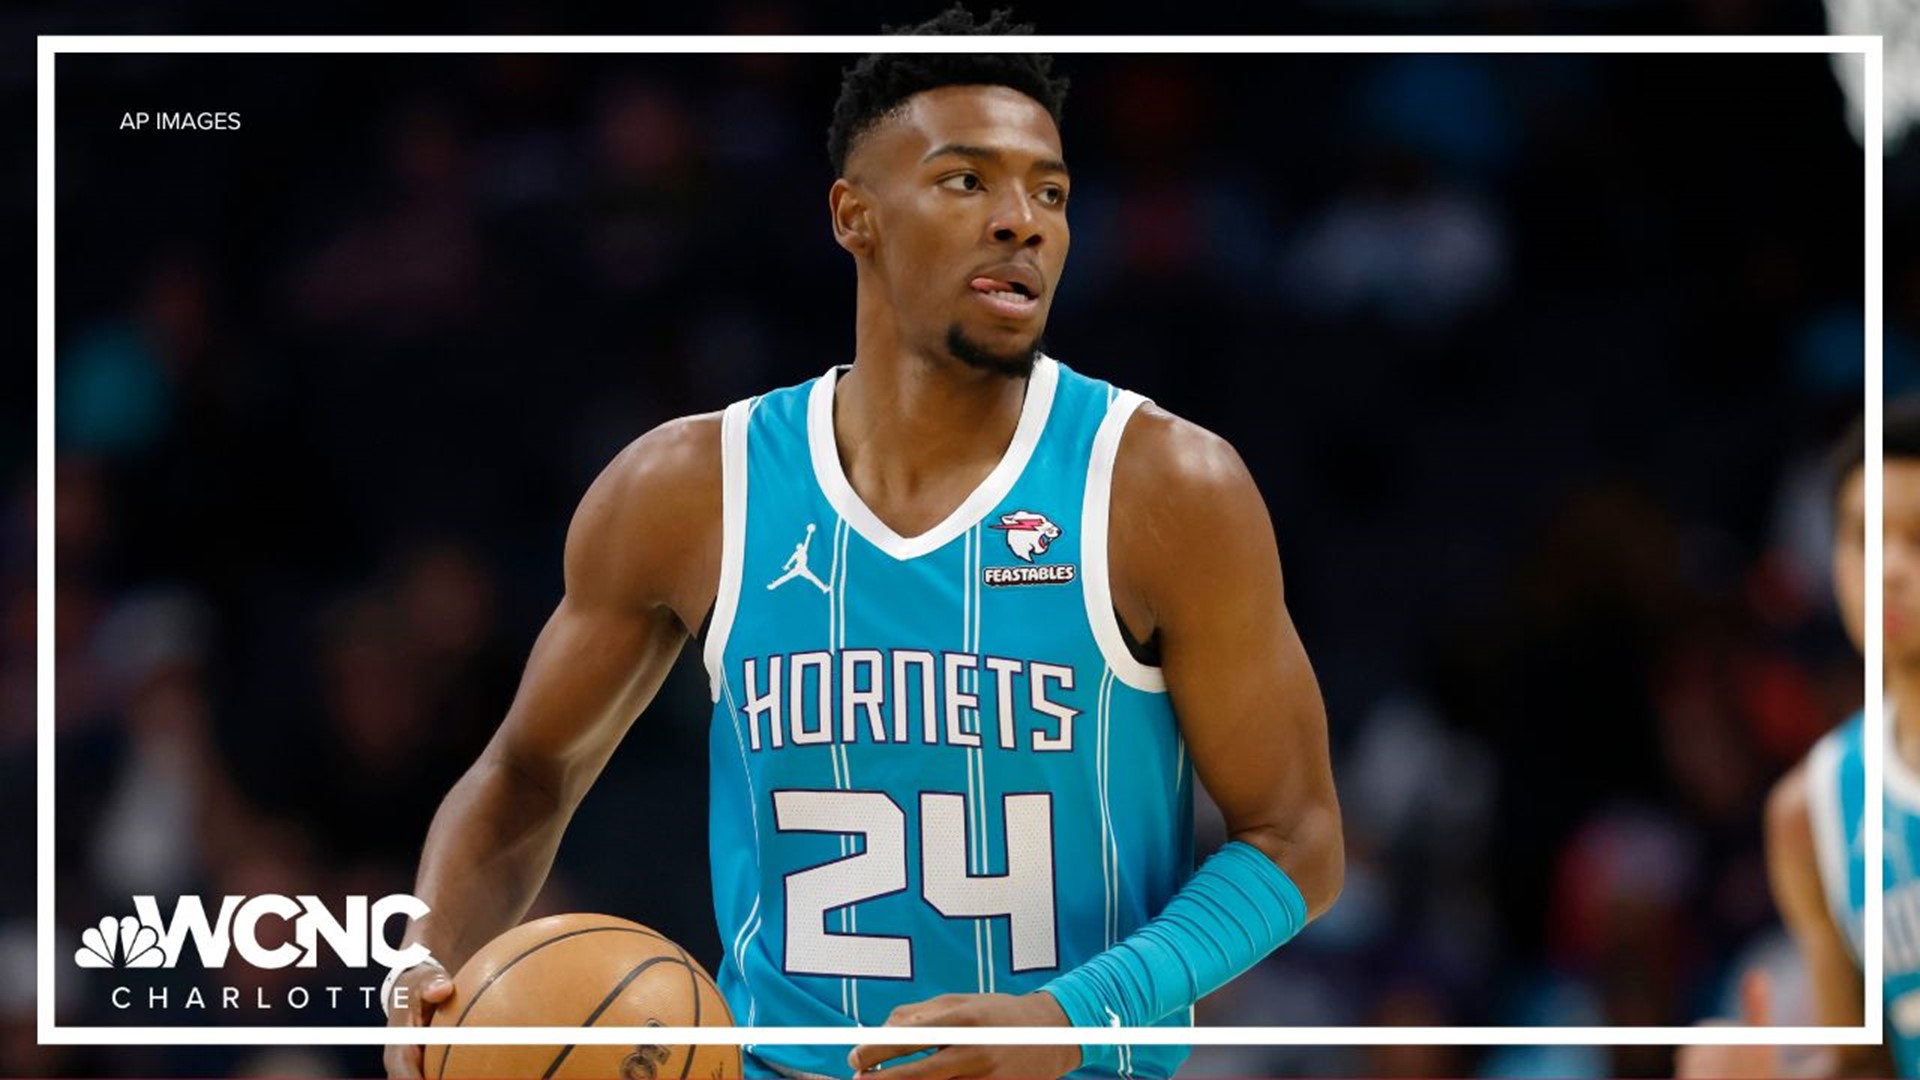 The Charlotte Hornets wrapped up their home schedule this week, and according to a report from ESPN, the team suffered the worst attendance in the entire NBA.